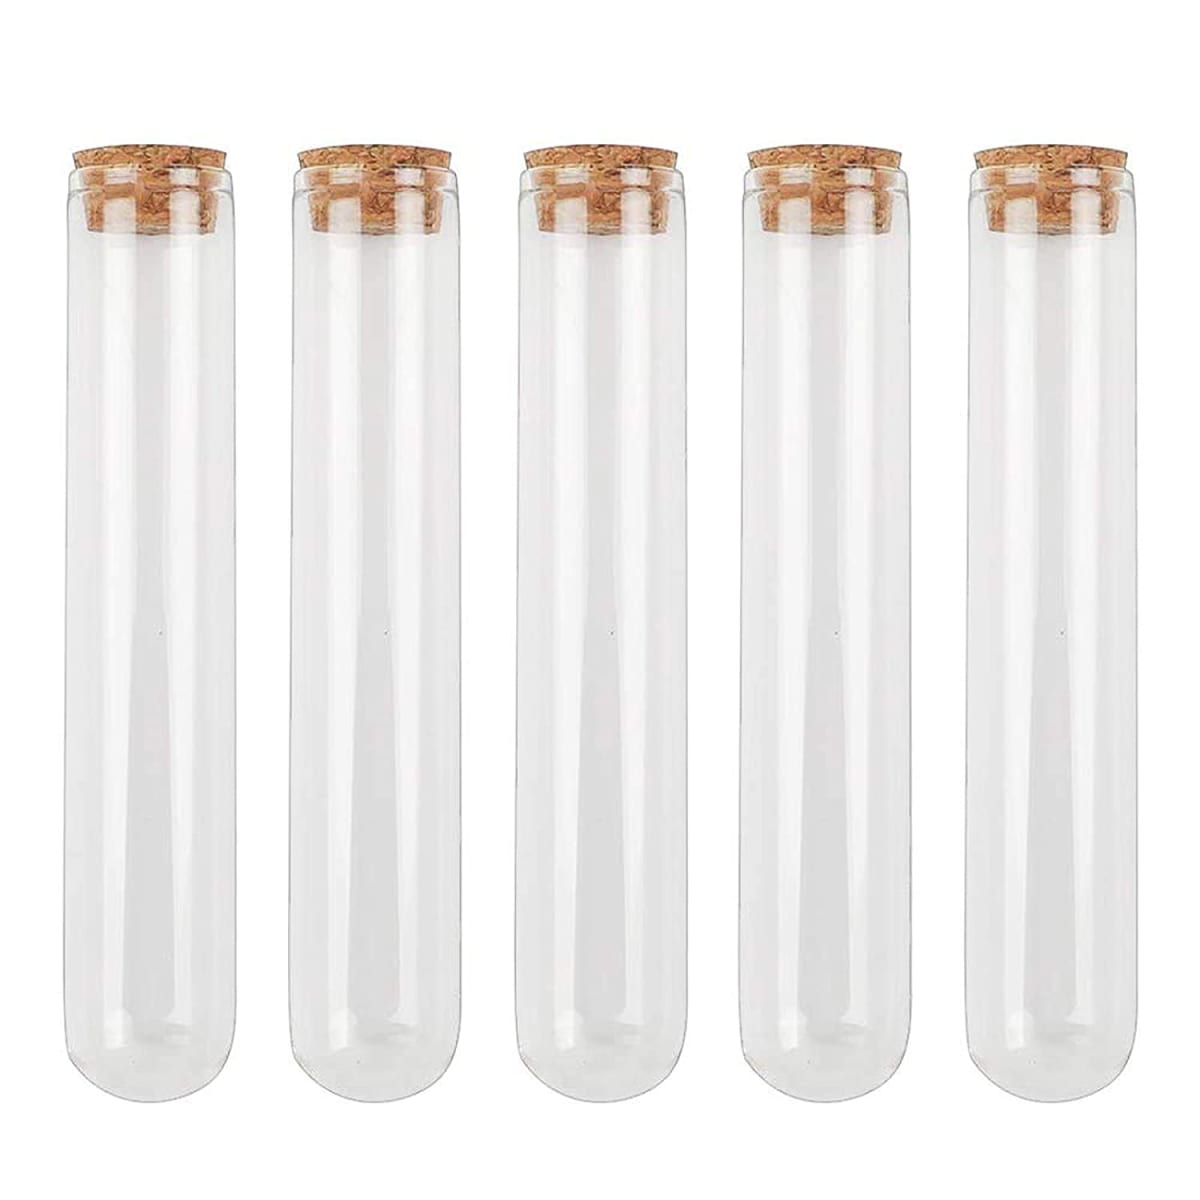 Glass Test Tubes with Cork Stoppers for Bath Salt